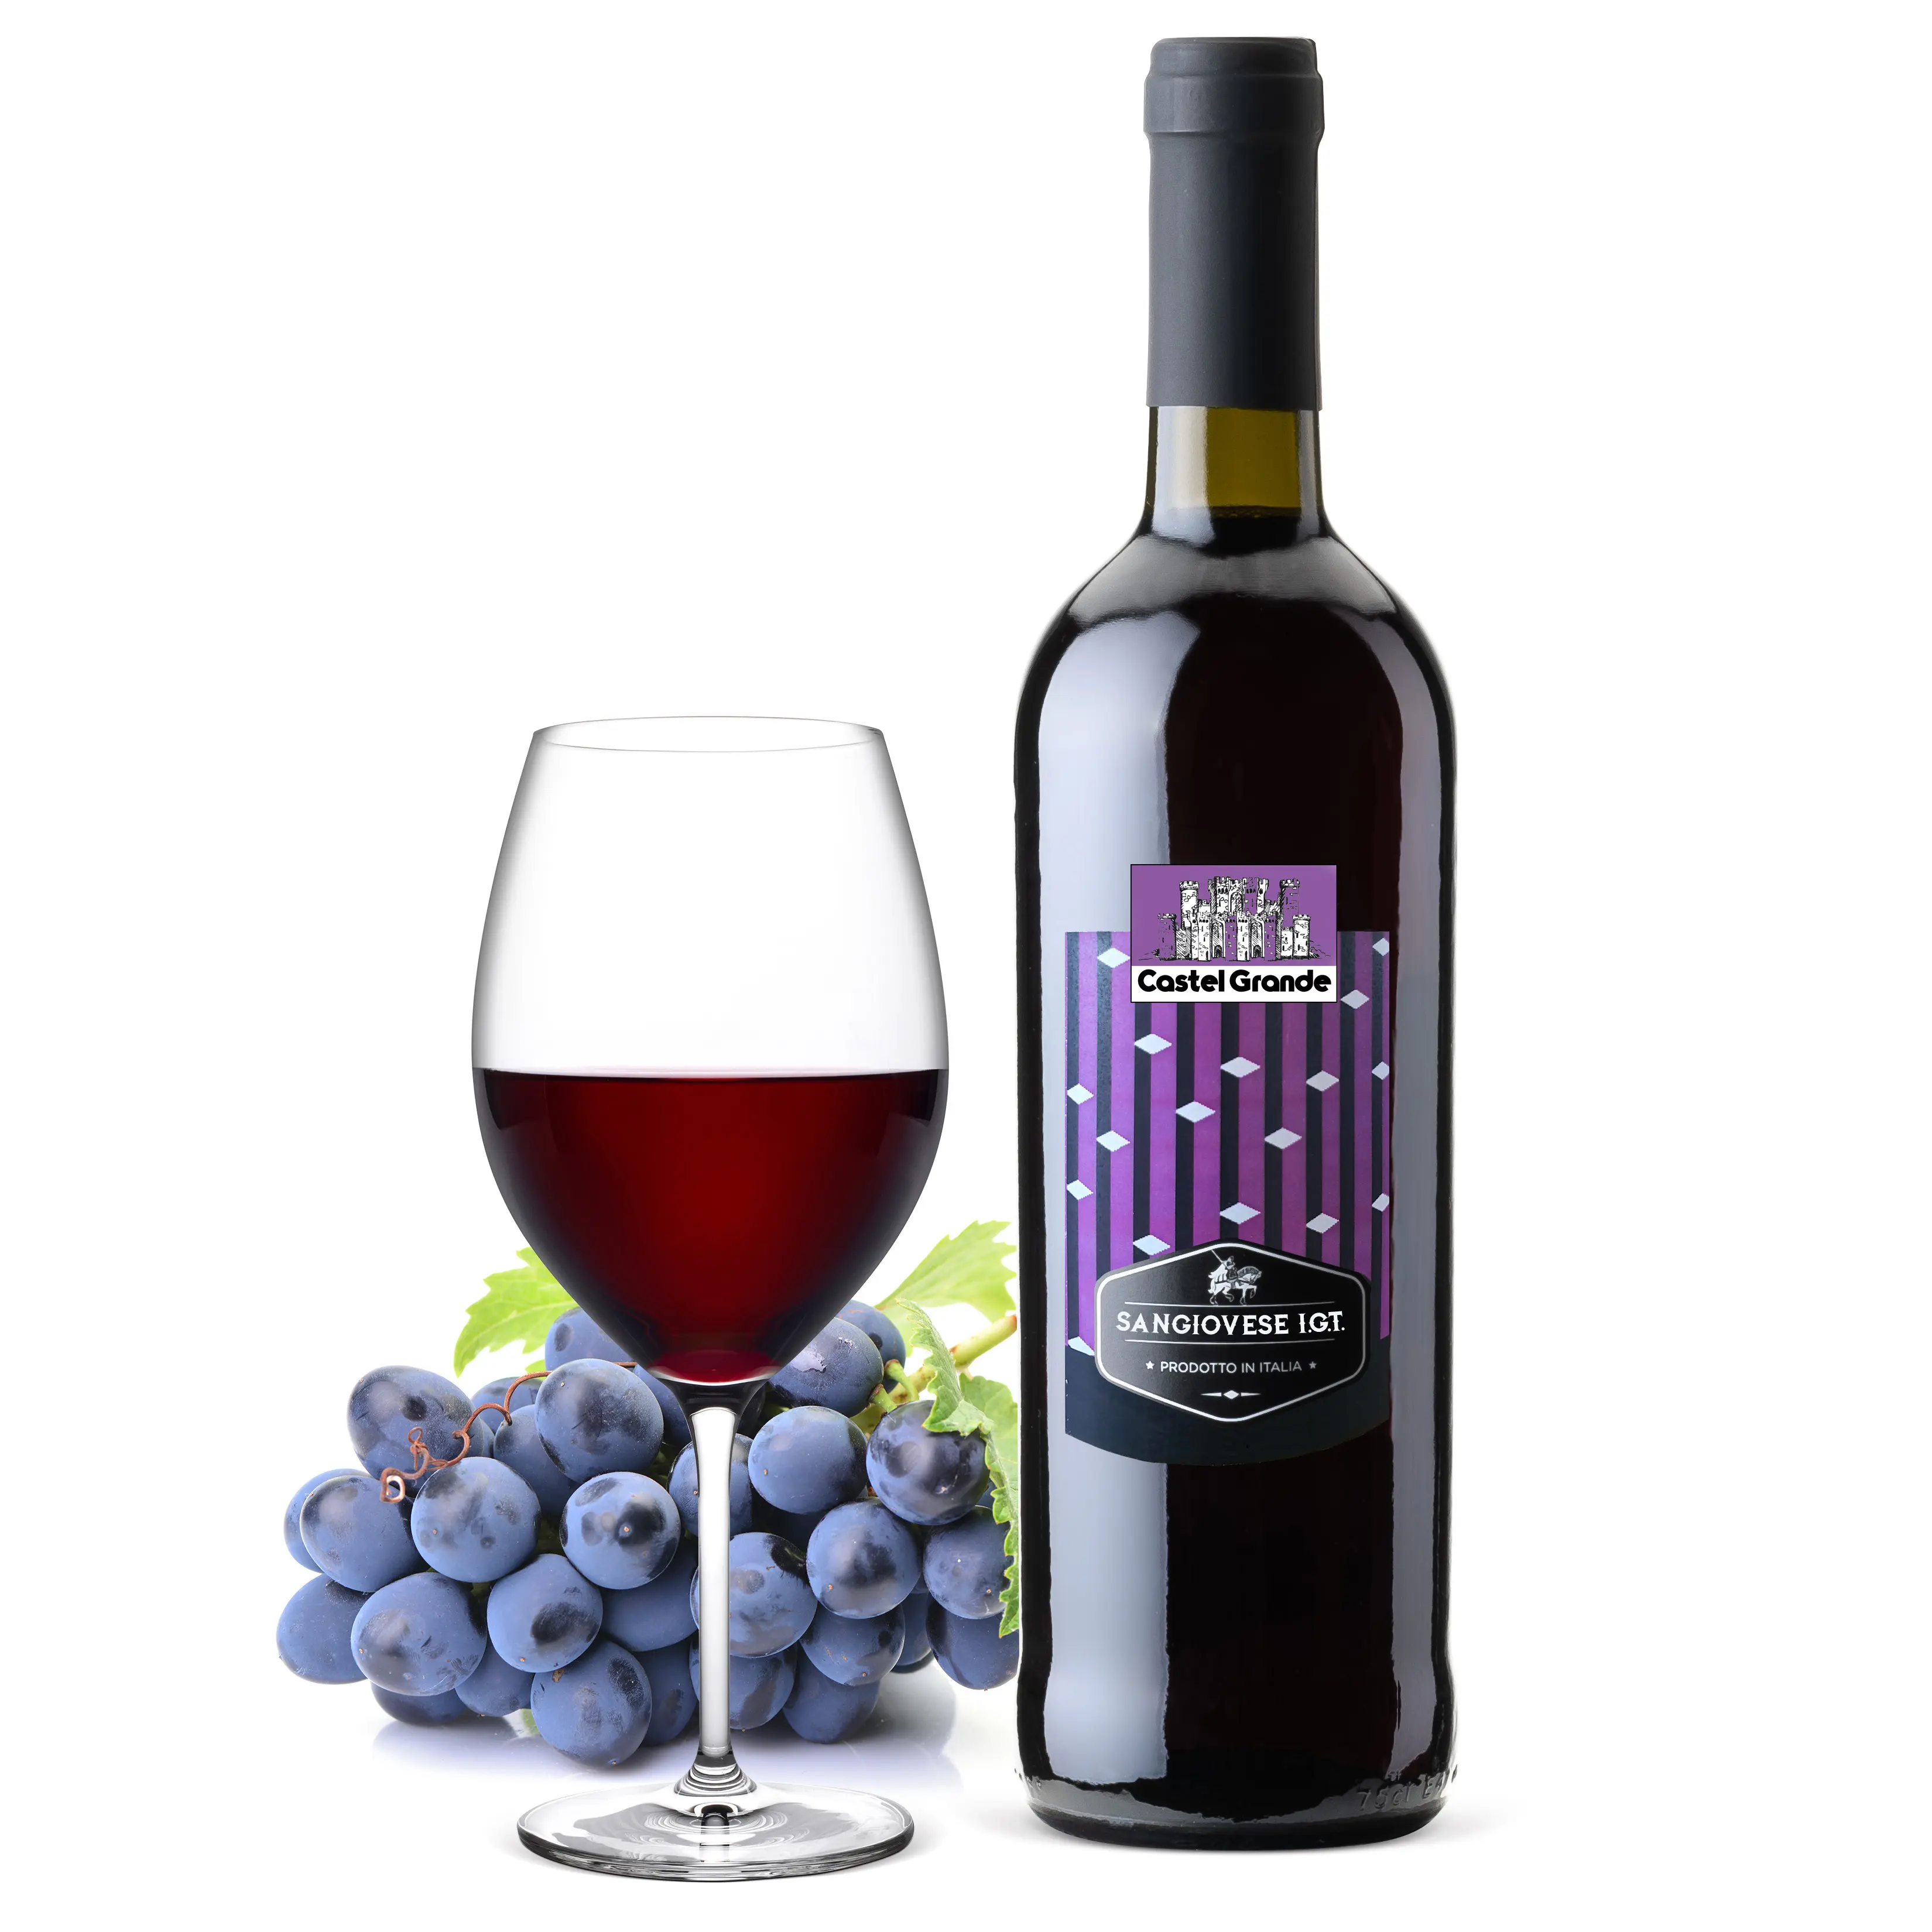 Italian red wine Sangiovese IGT 750 ml made in Italy table wine quality product glass bottle